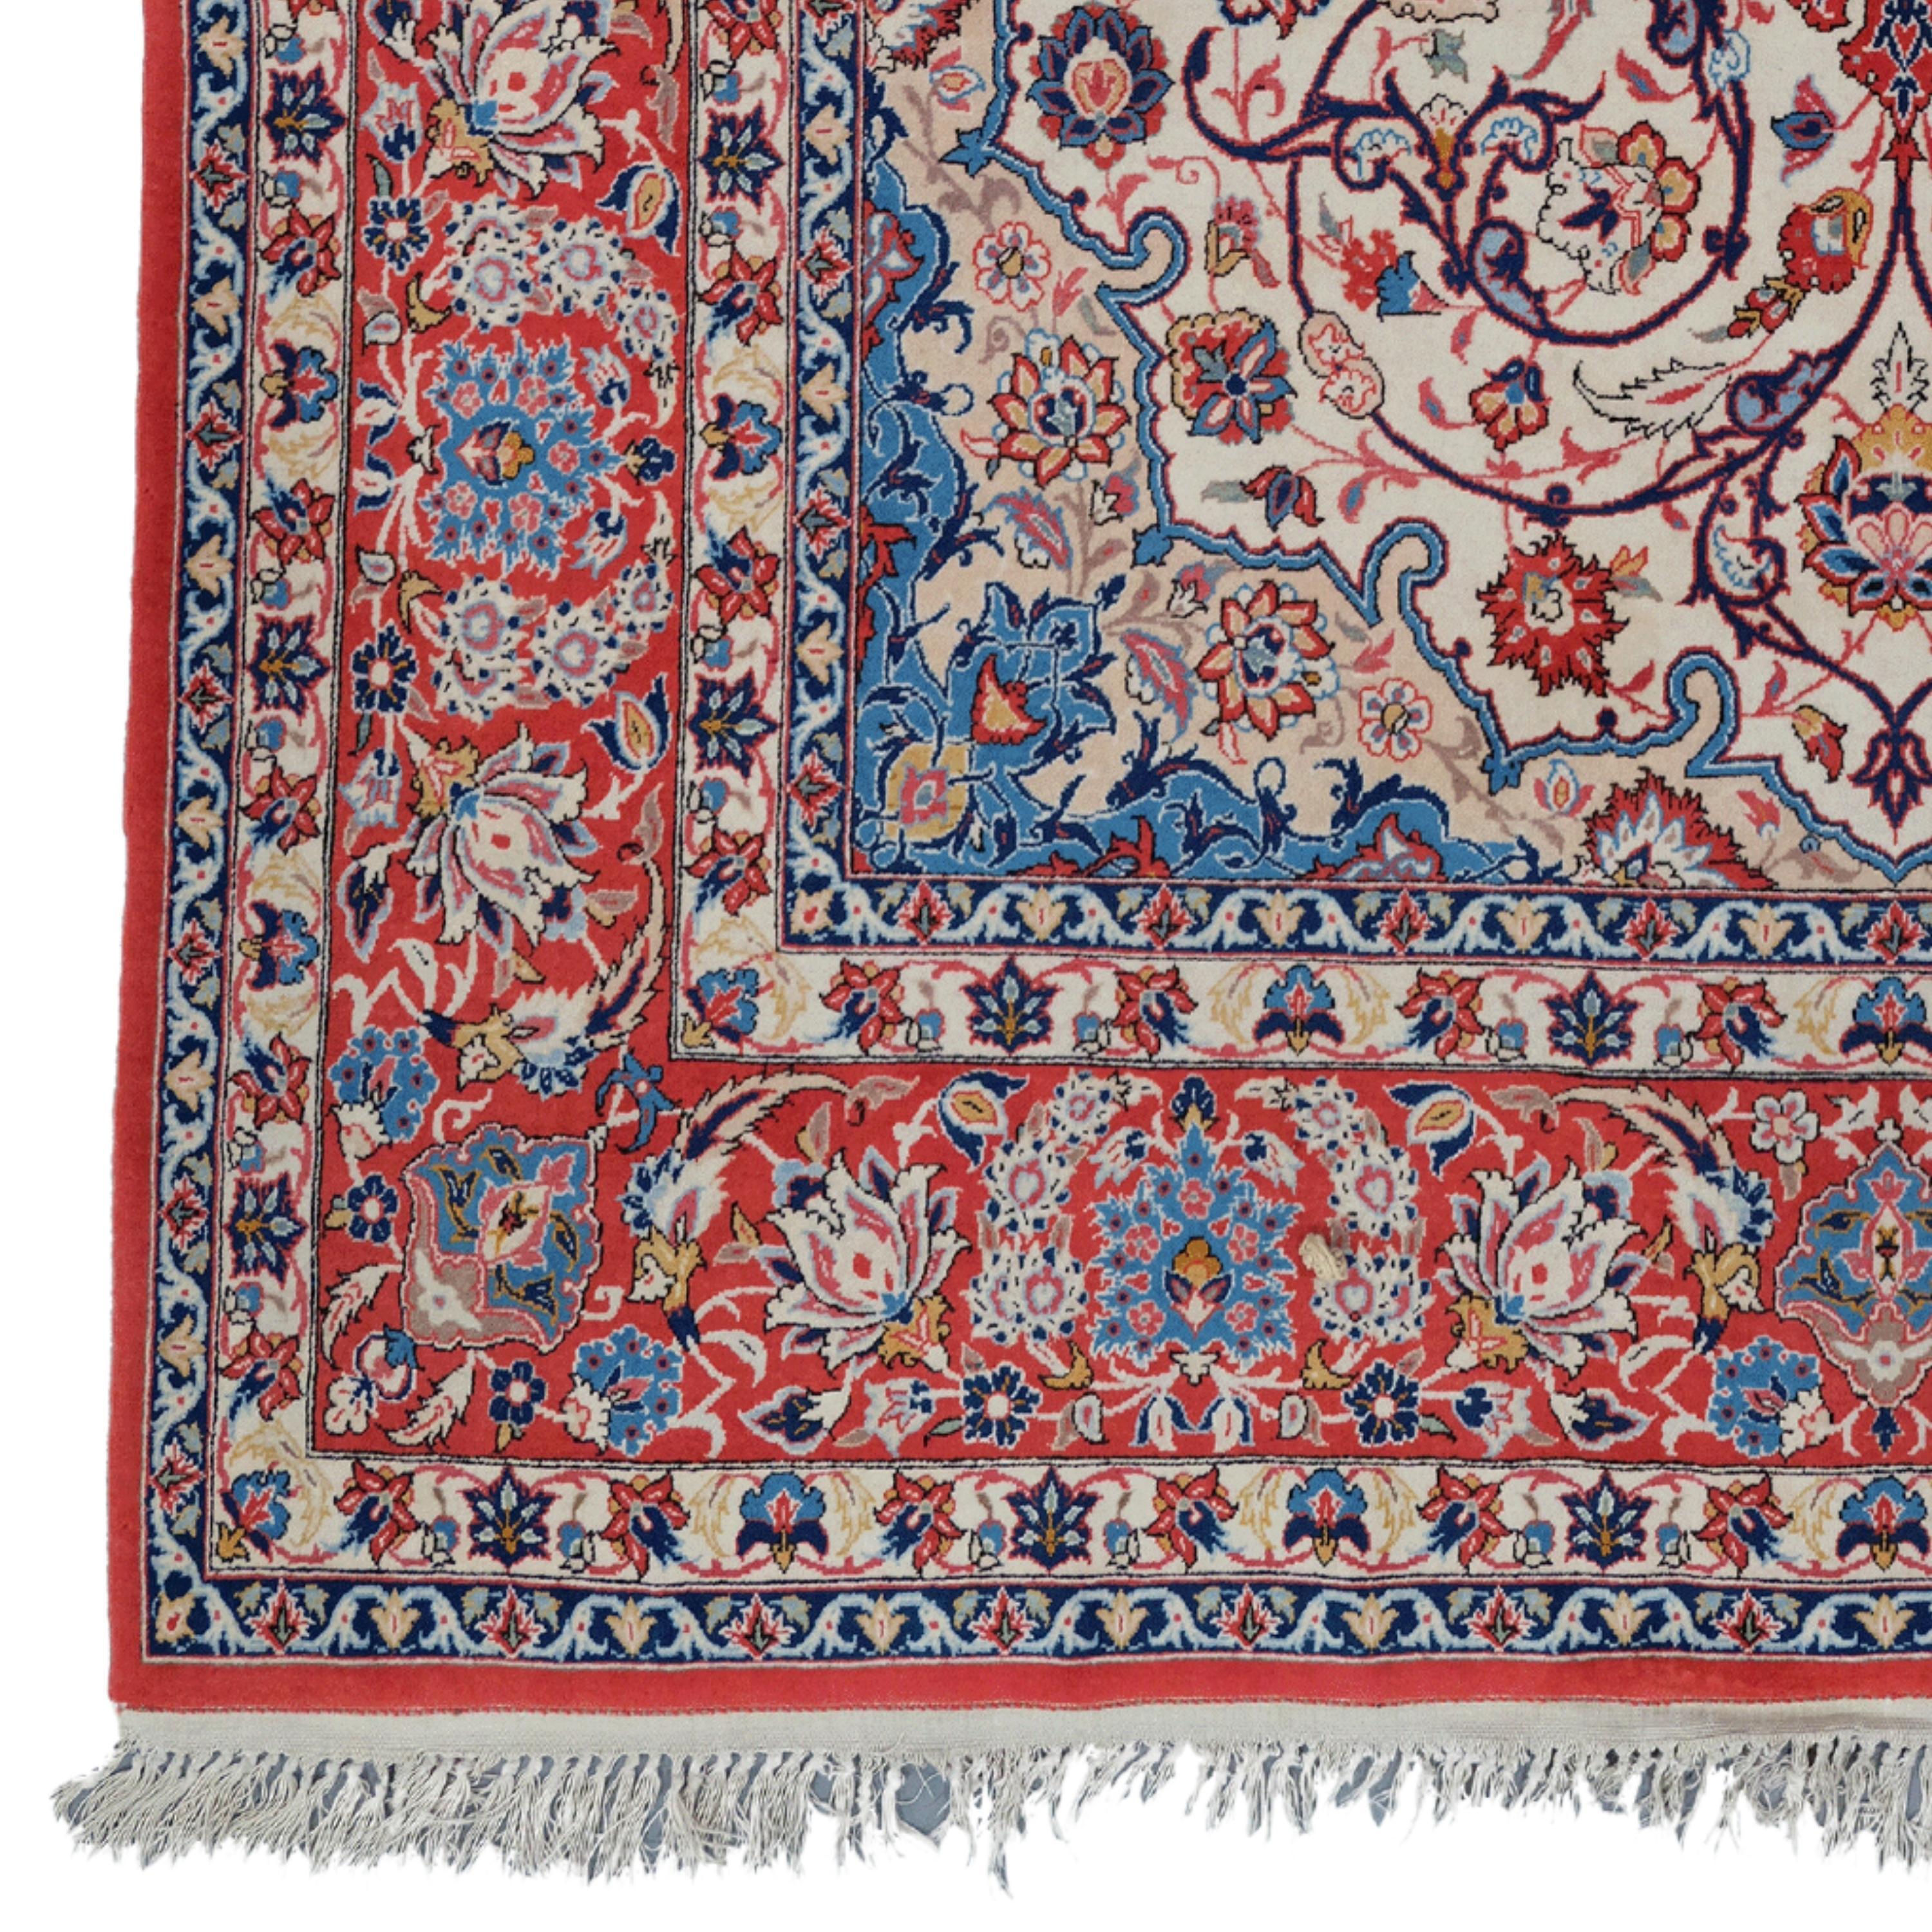 Antique Isfahan Rug
Late of 19th Century Isfahan Rug
Size: 150×255 cm  4,92x8,36 Ft

Experience the elegance of time and the depths of history with this elegant 19th century antique Isfahan carpet. This work, every detail of which has been